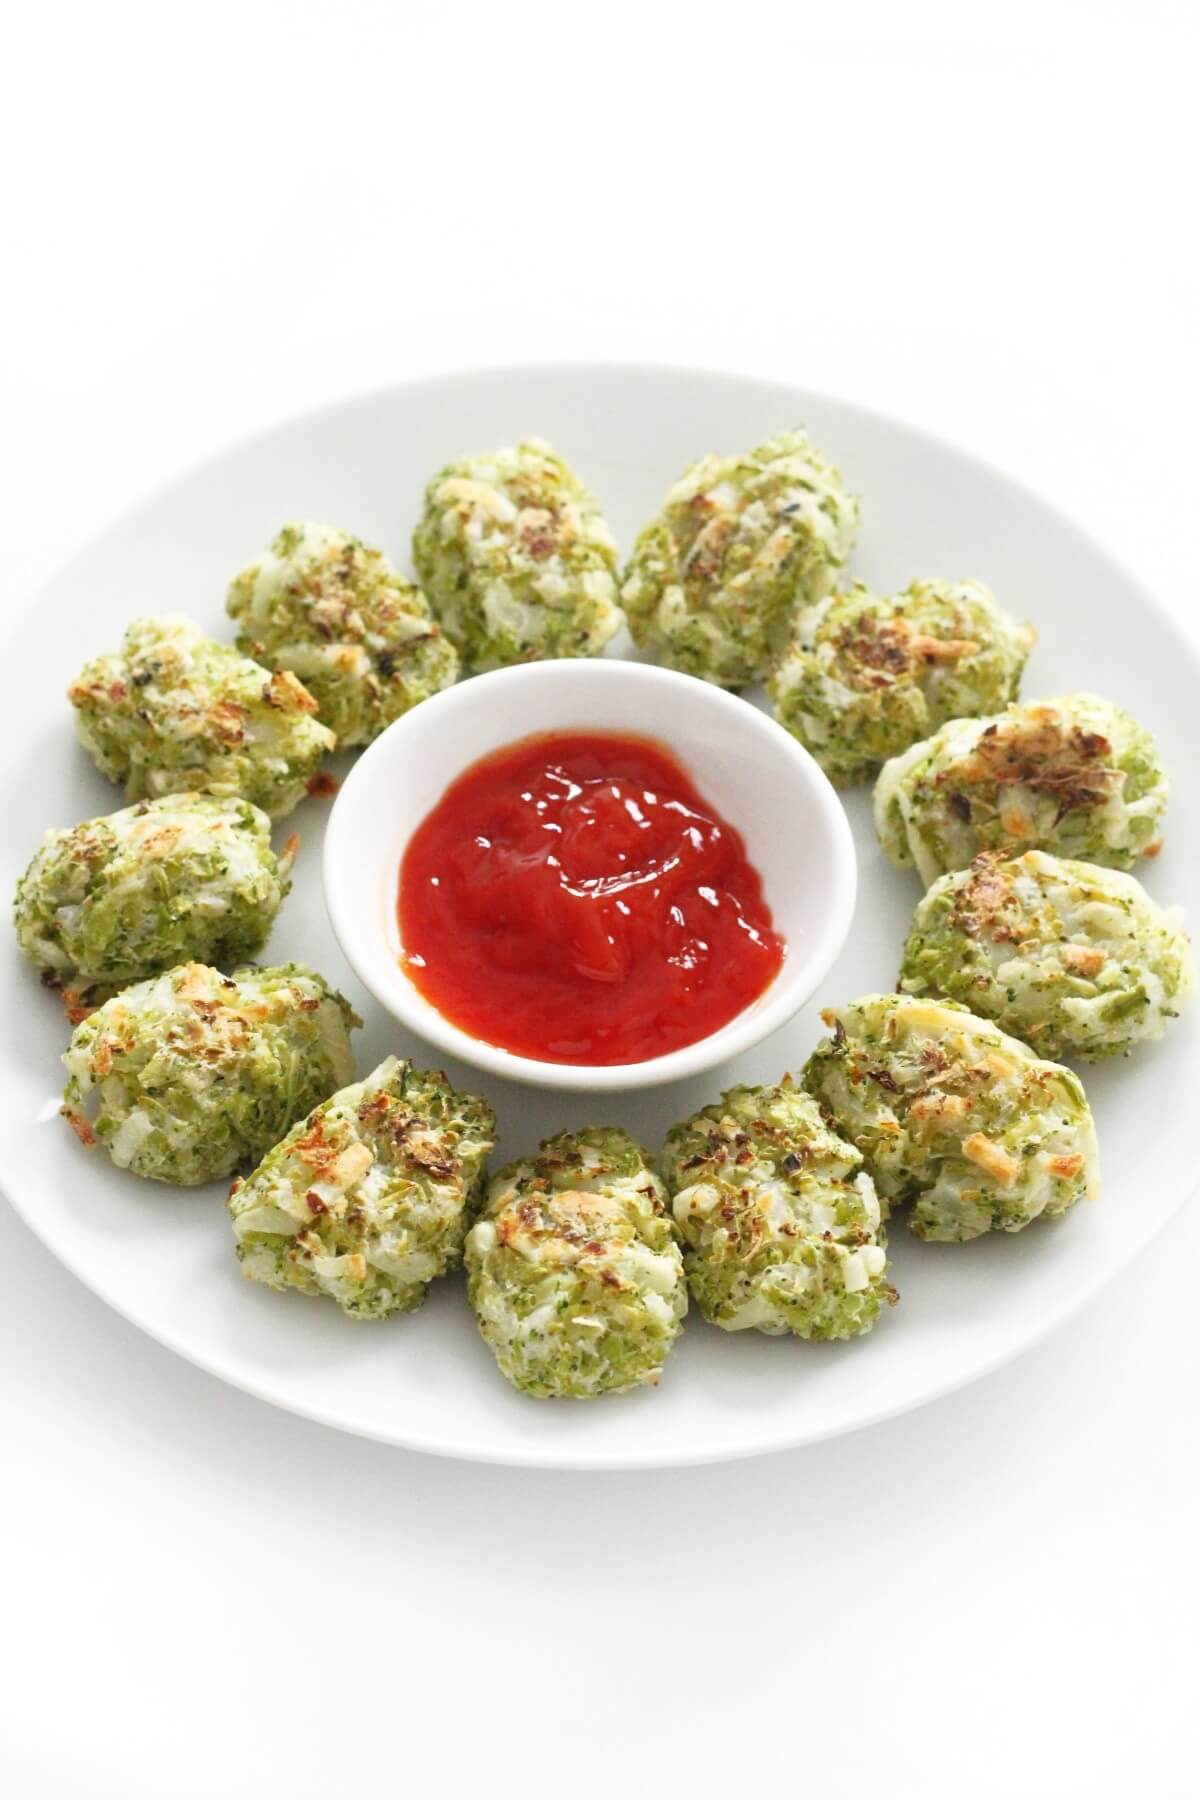 plate of broccoli tater tots with ketchup bowl.